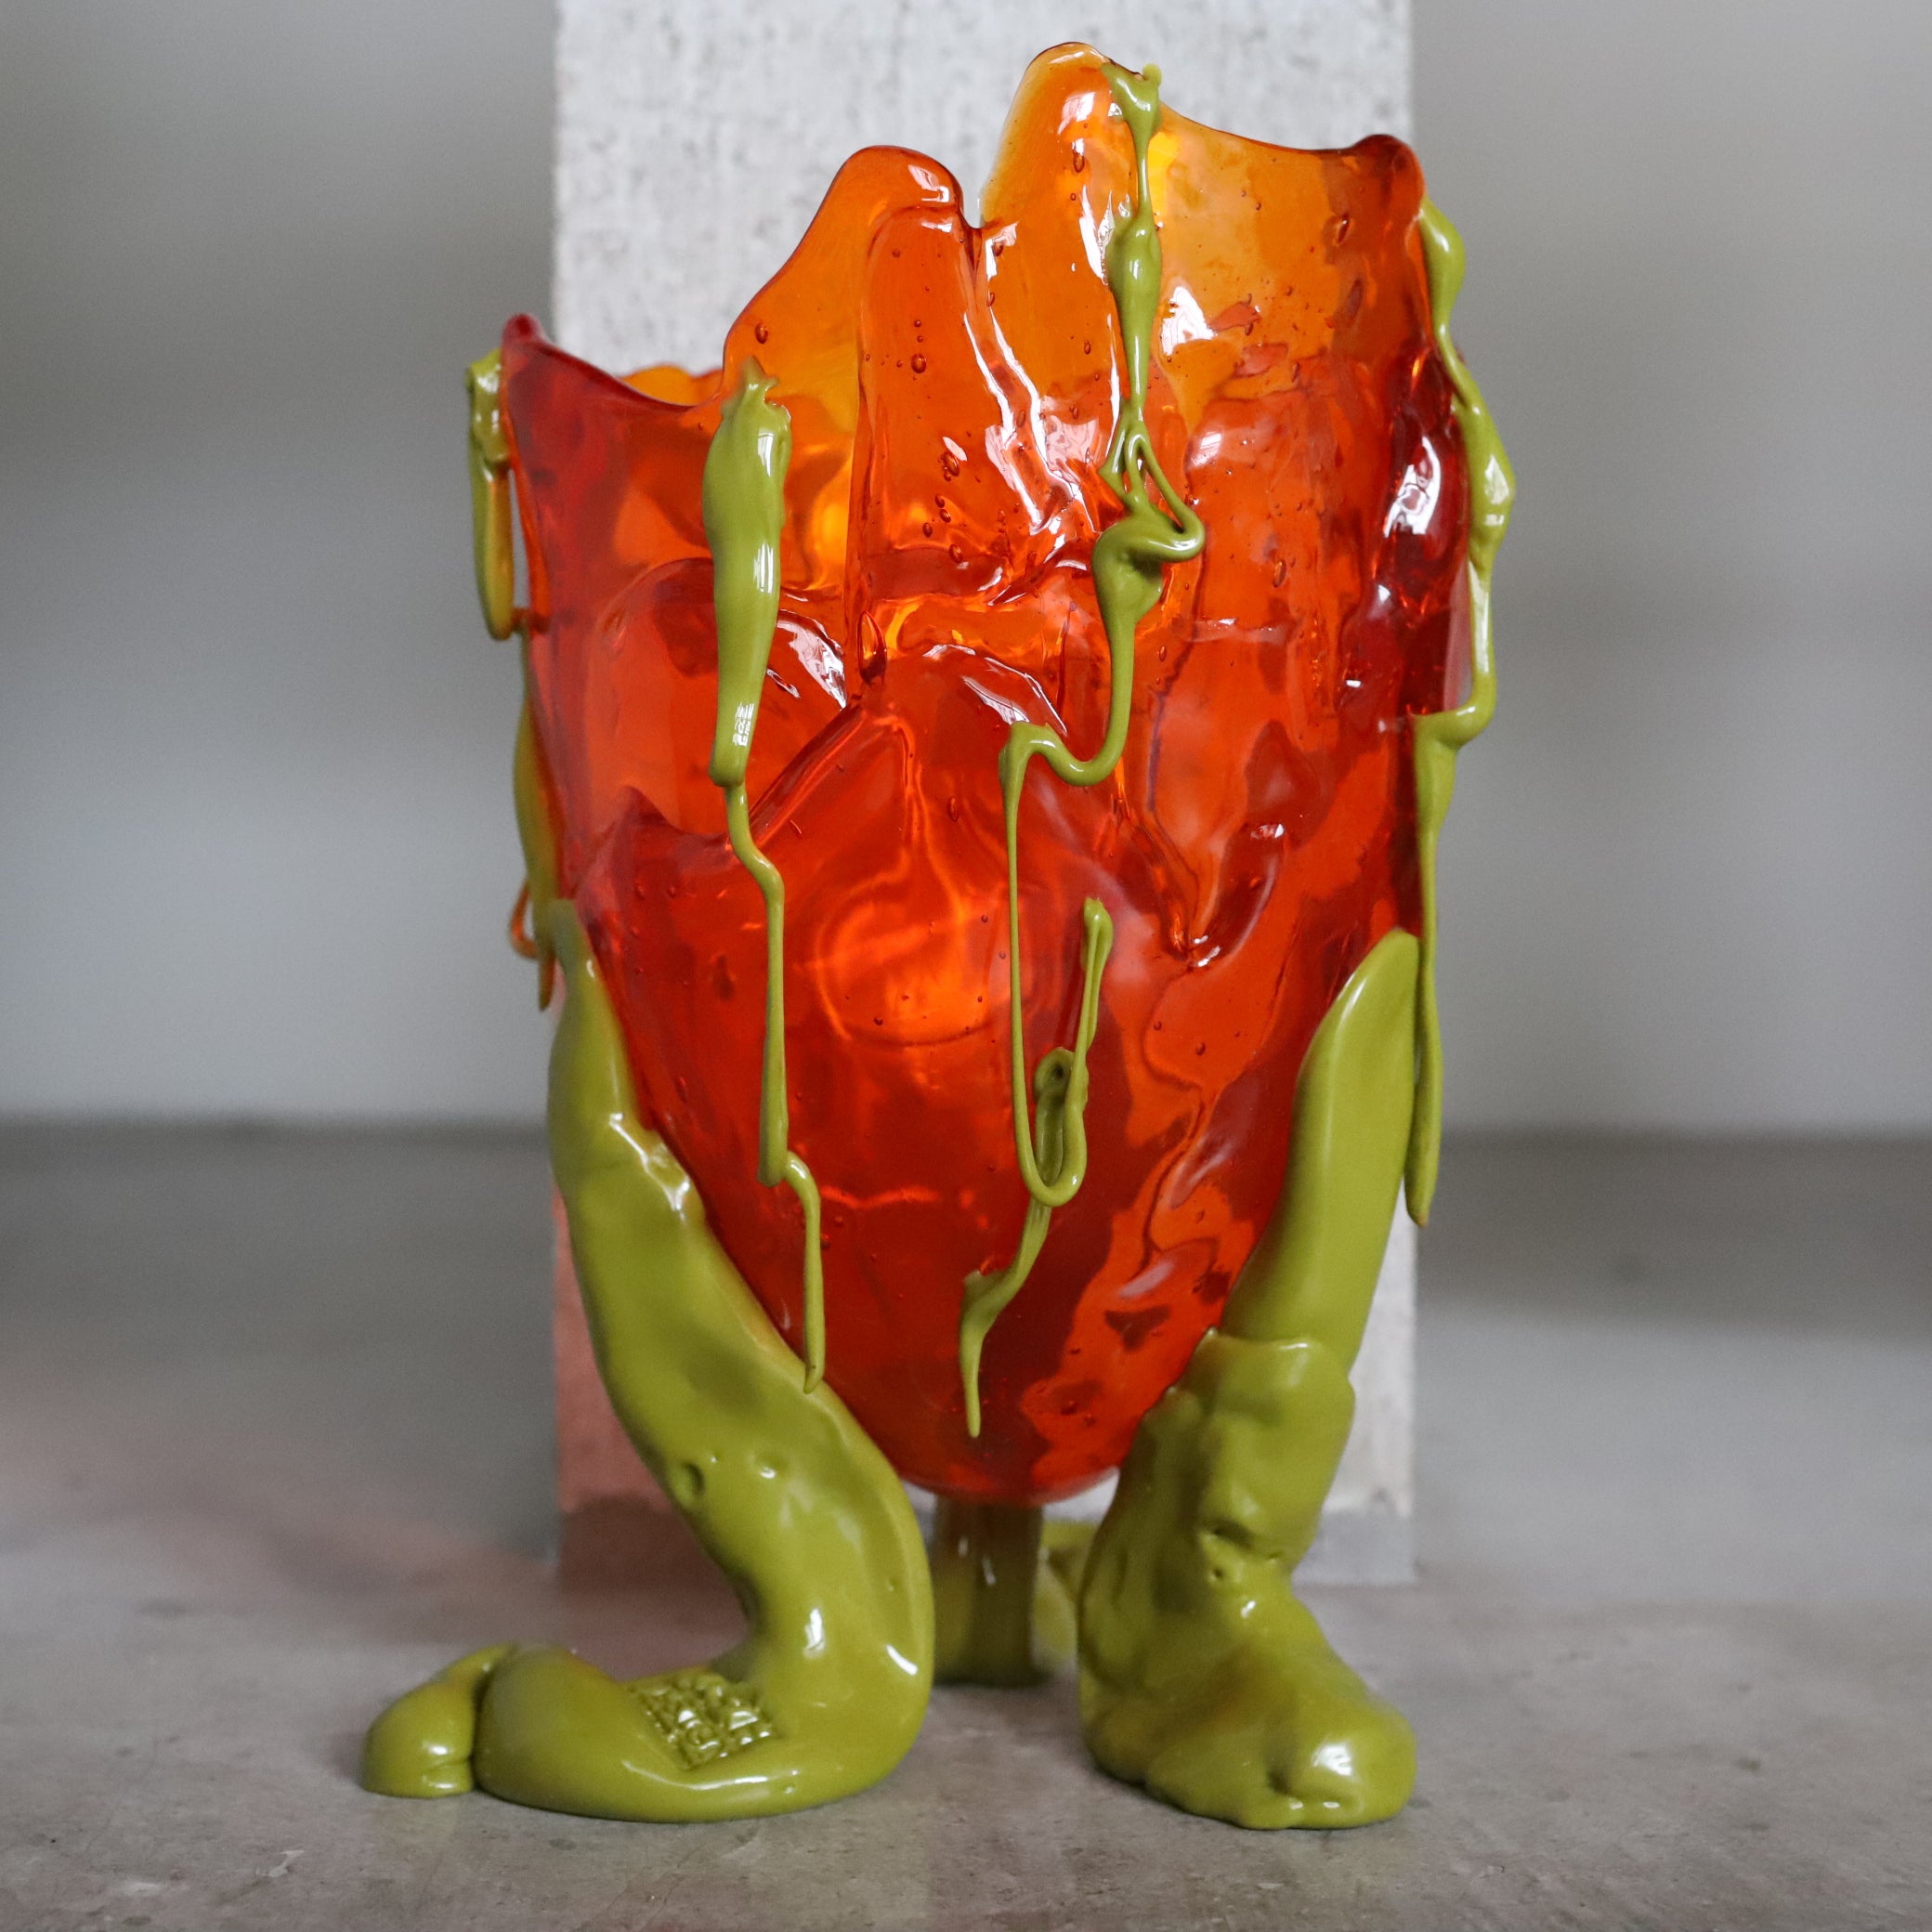 Clear Special Vase - Fish Design by Gaetano Pesce